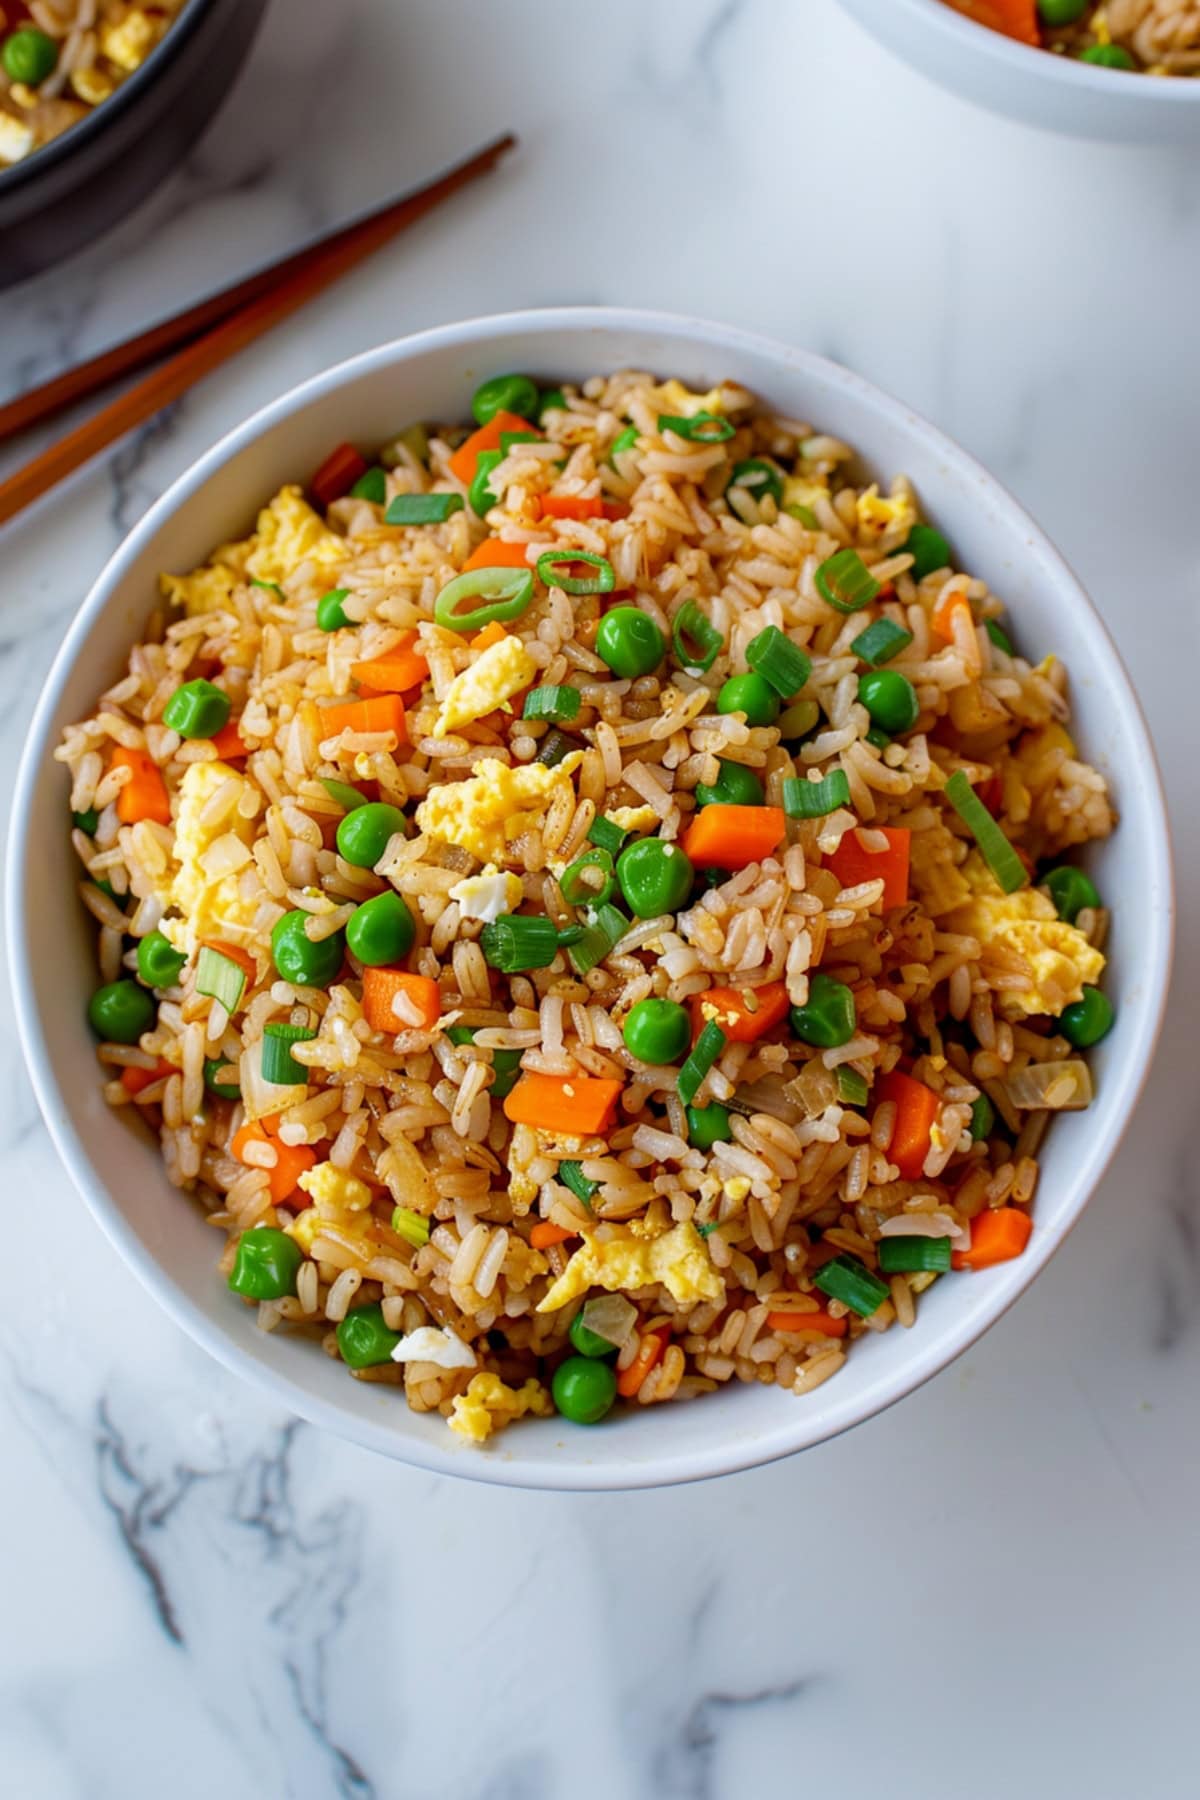 Homemade hibachi fried rice with egg, green peas, carrots, and green onions